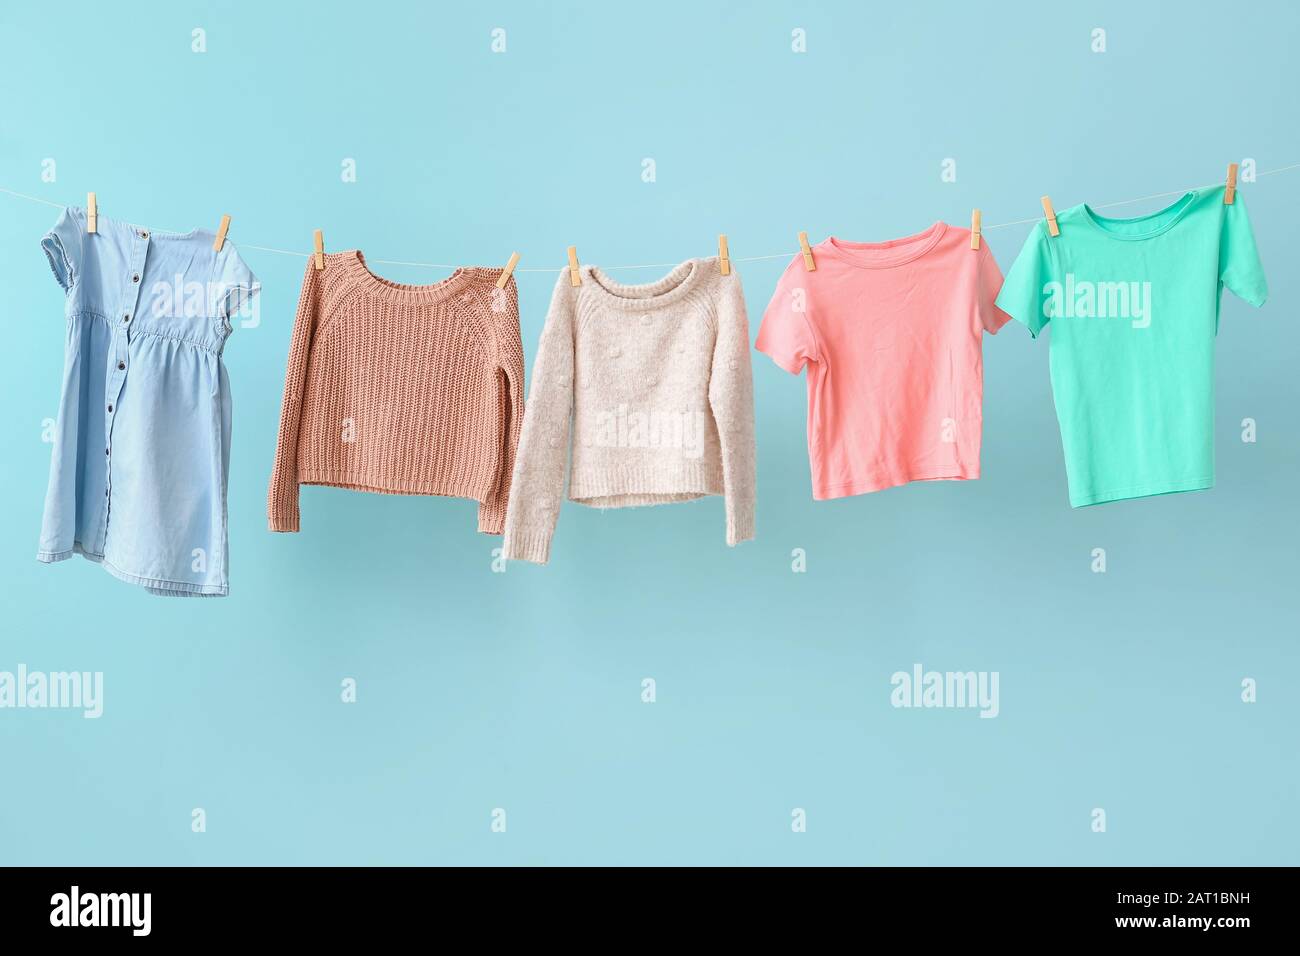 Clean laundry hanging on line against color background Stock Photo